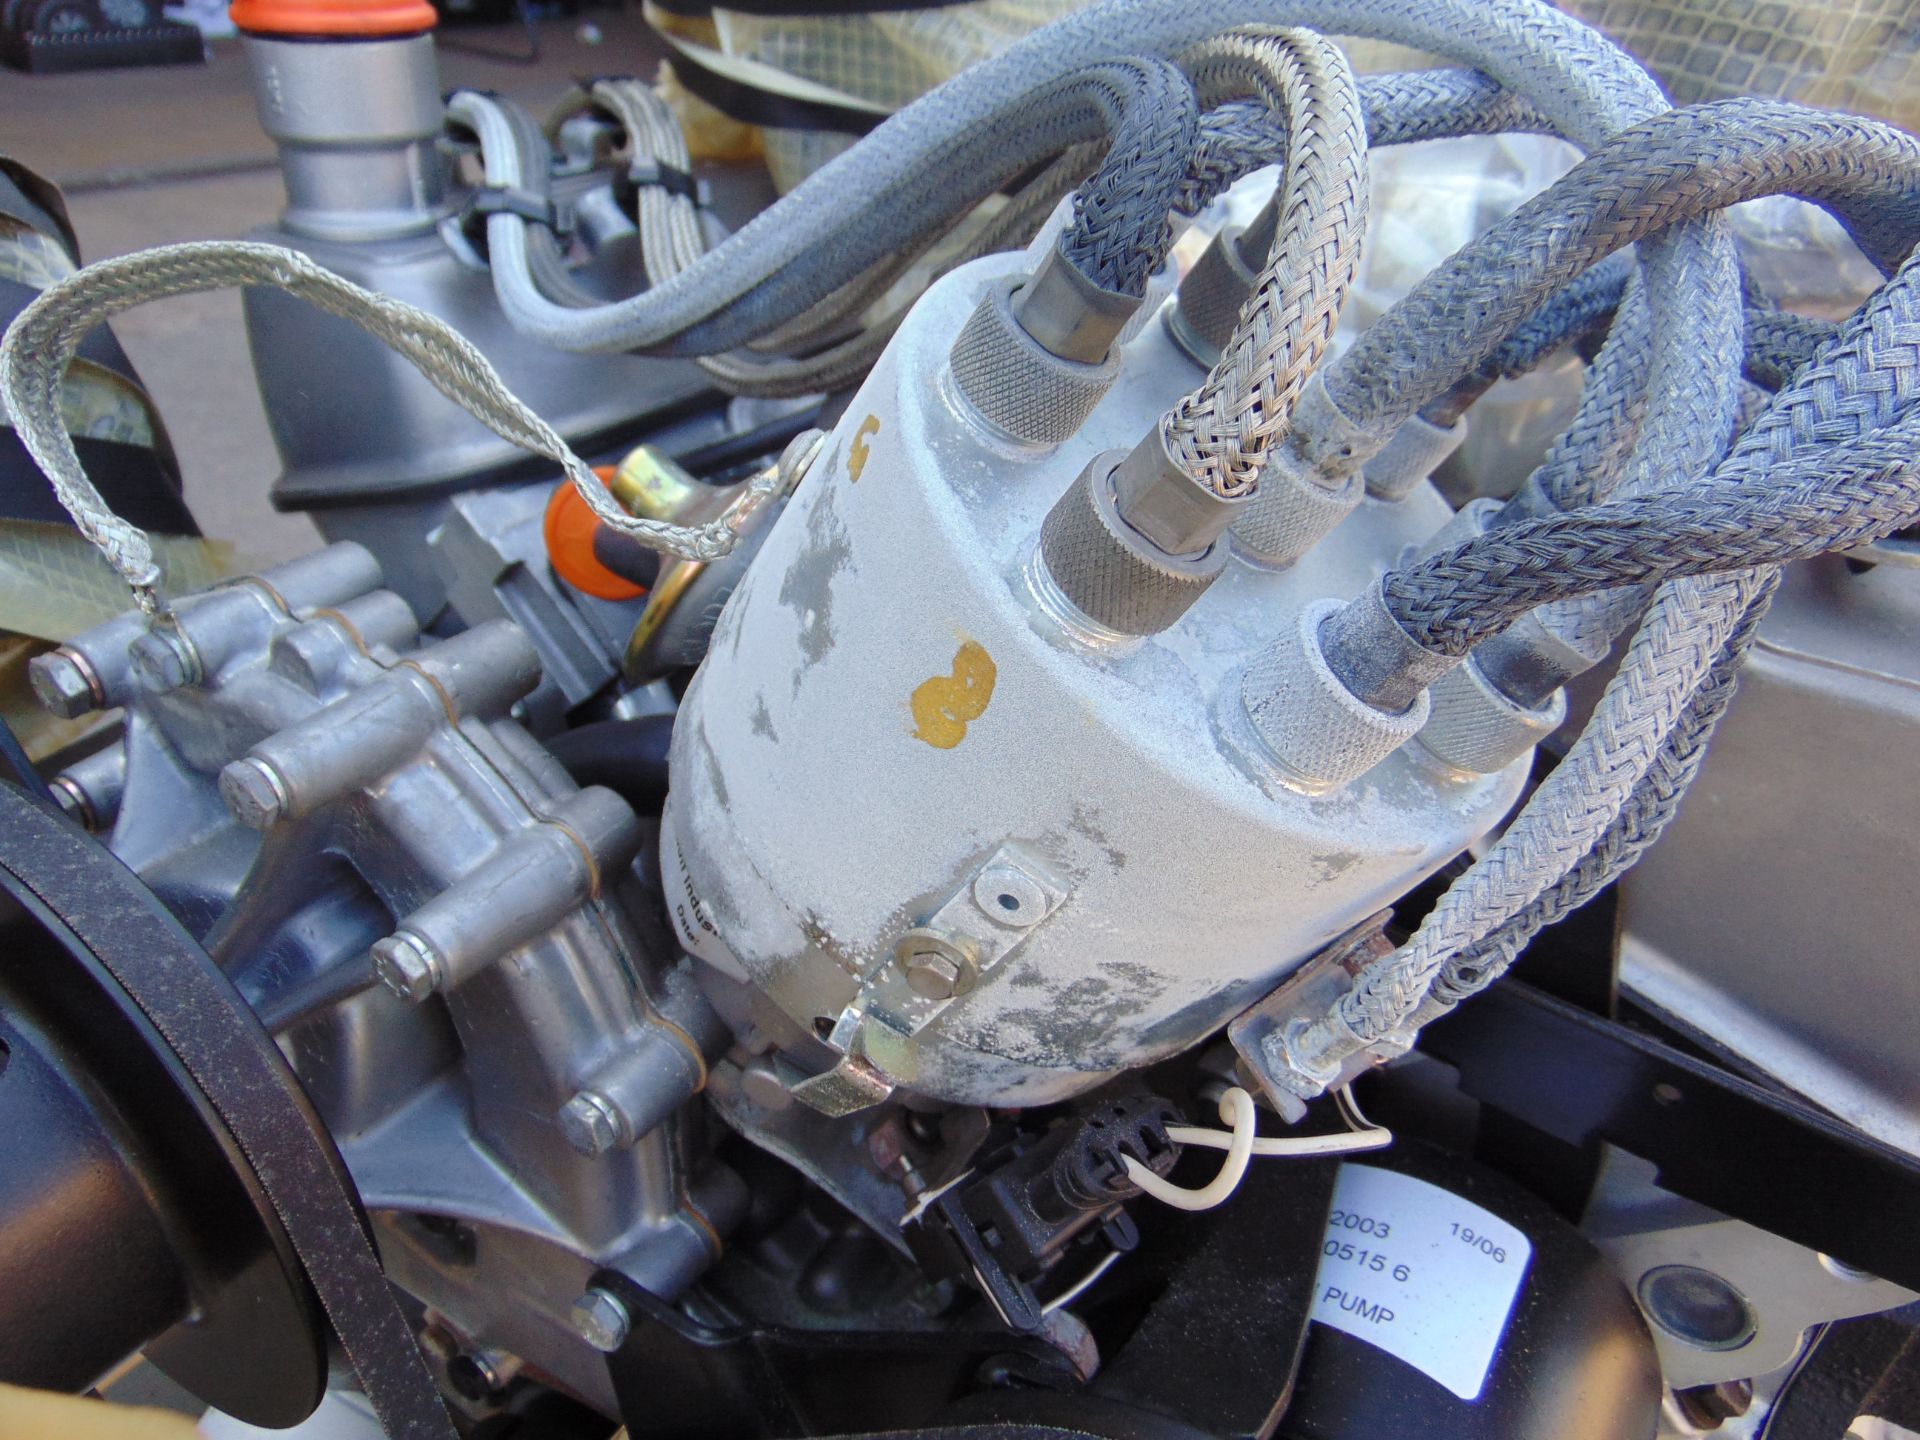 Fully Reconditioned Land Rover V8 Engine c/w all Accessories, as shown in Crate etc - Image 10 of 21